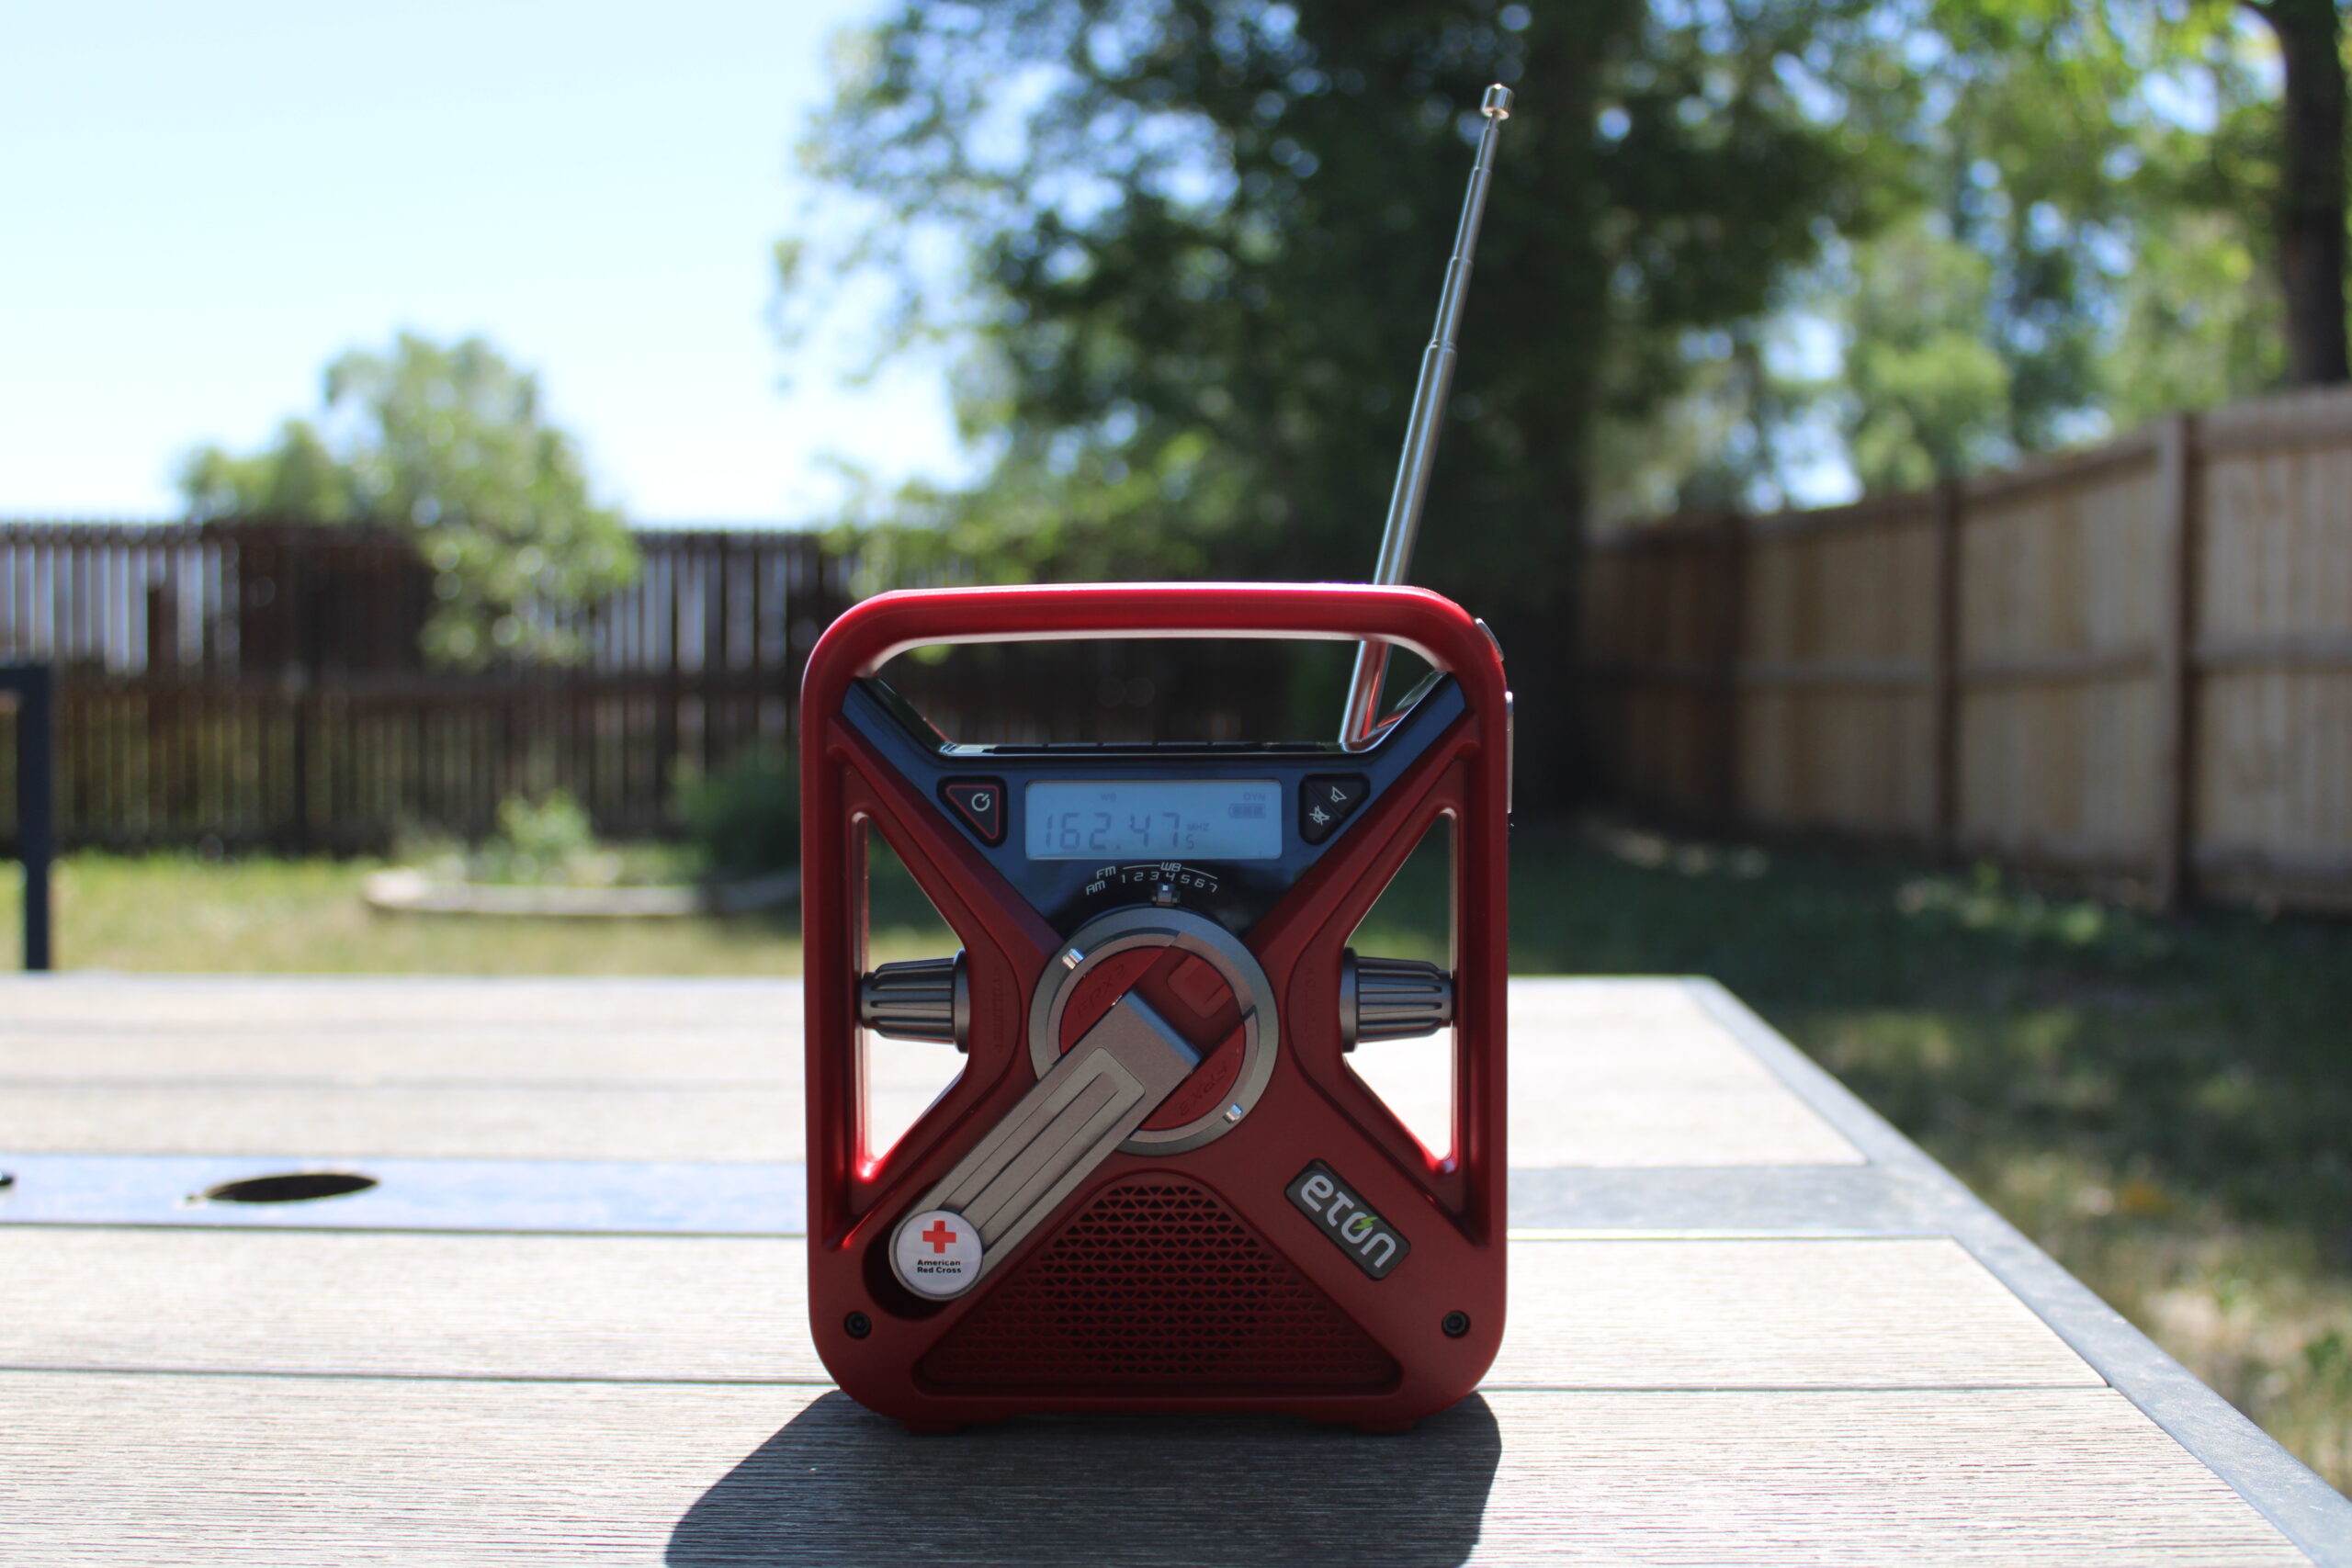 Broadcast radio: The most reliable medium for disaster updates